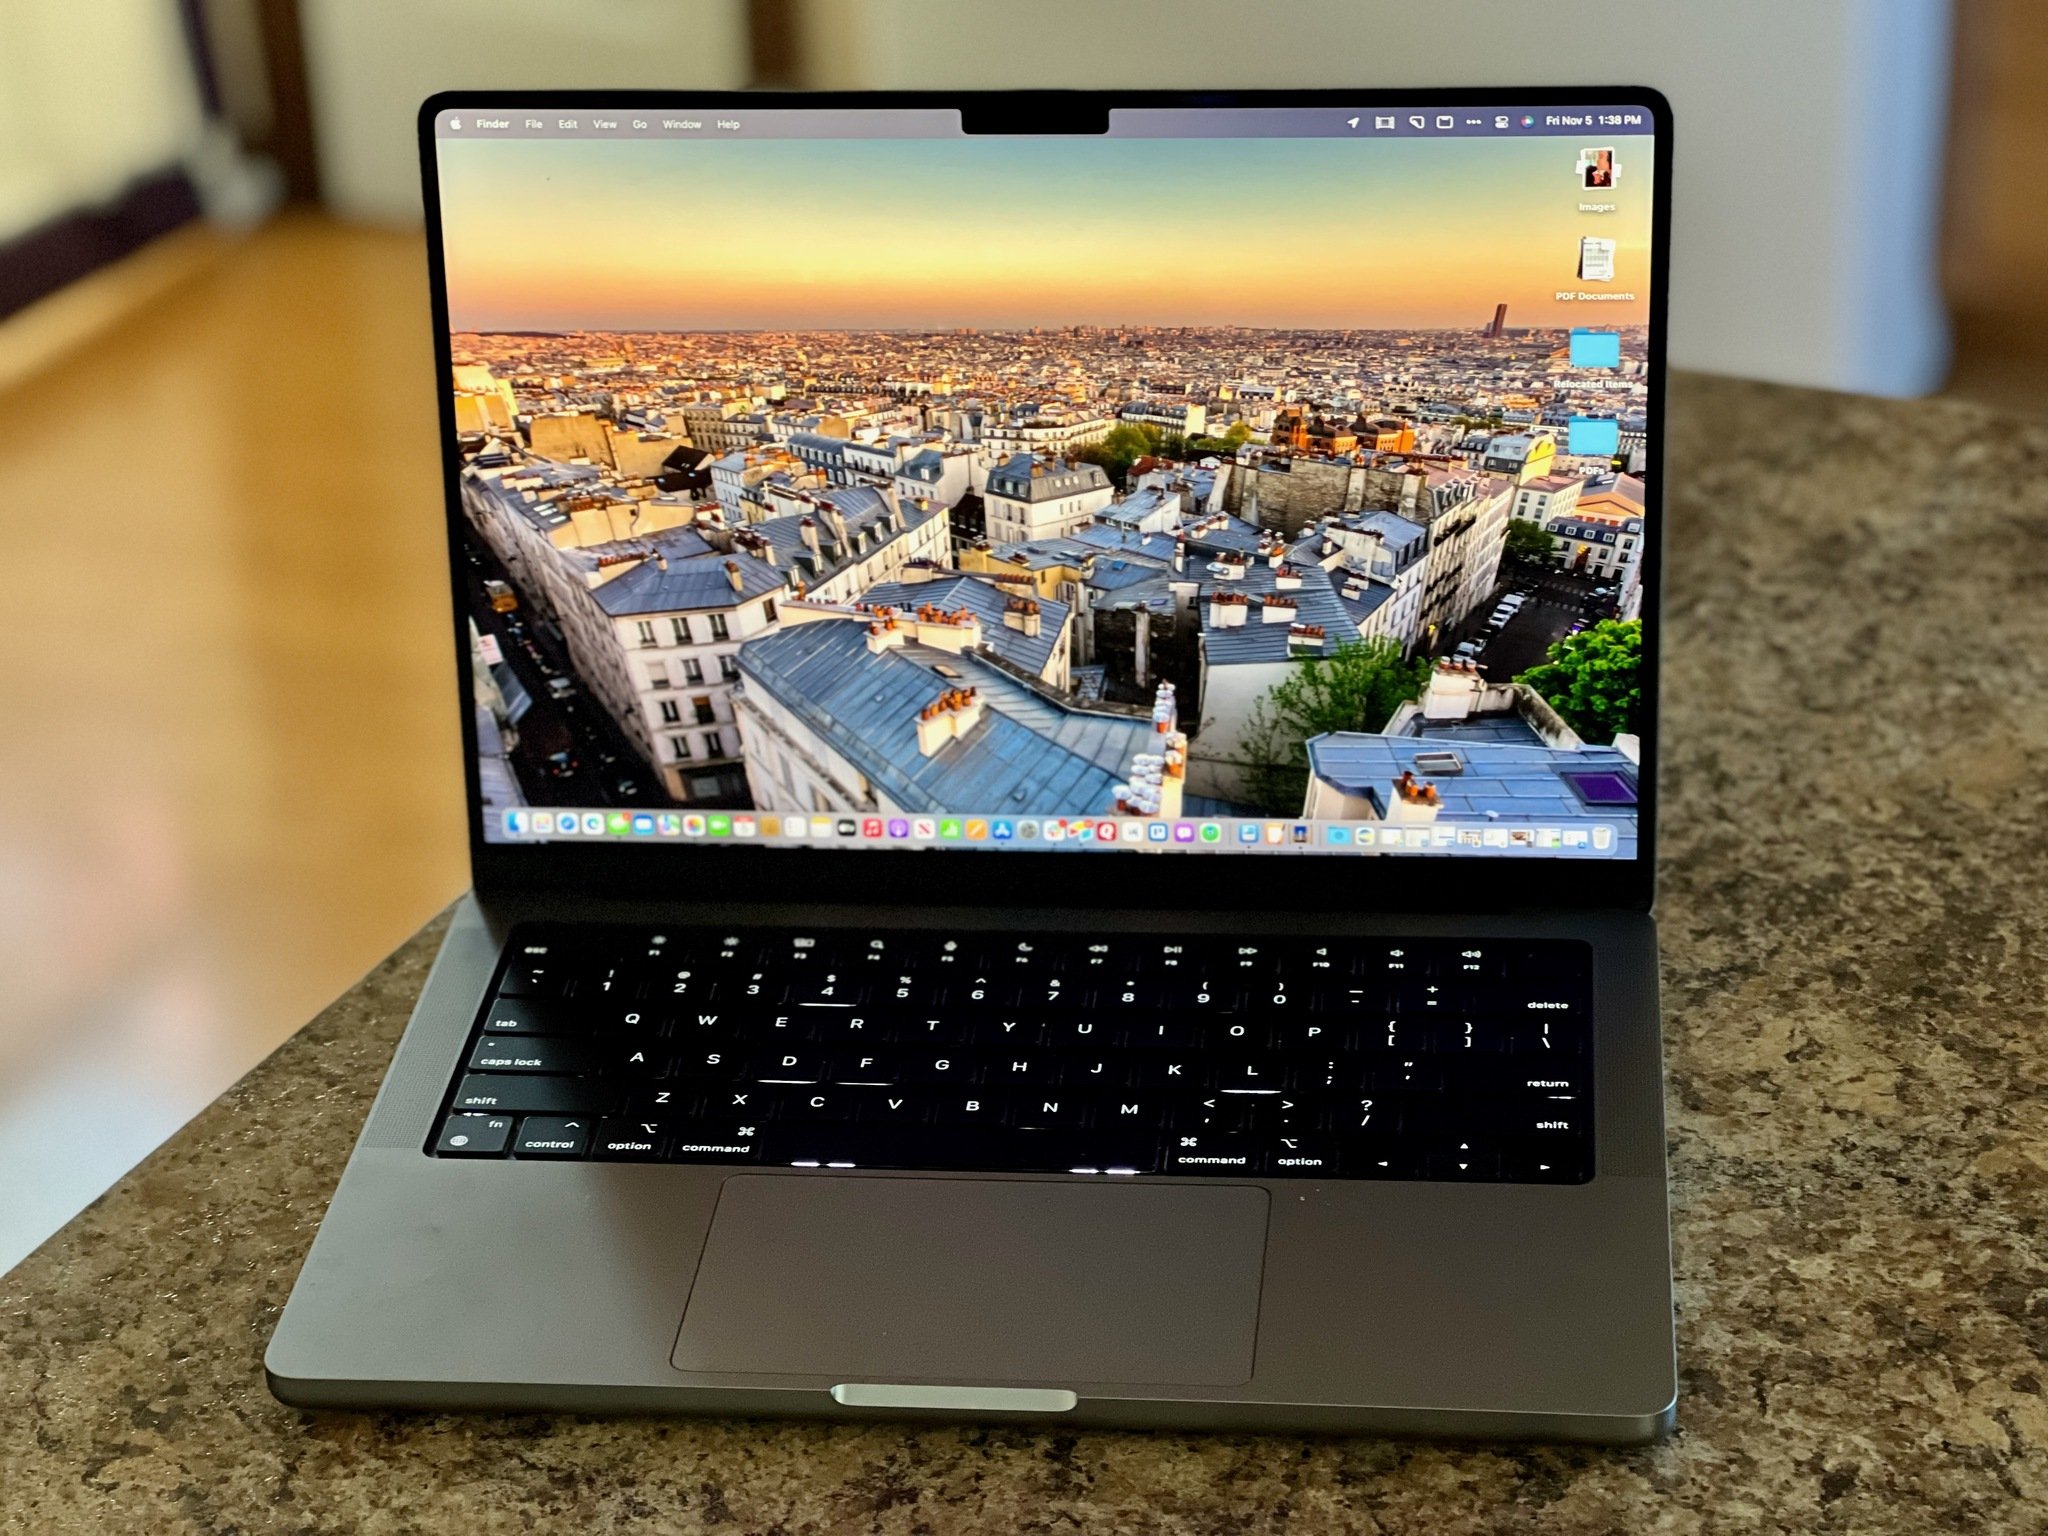 MacBook Pro 14-inch (2021) review: A throwback design with serious